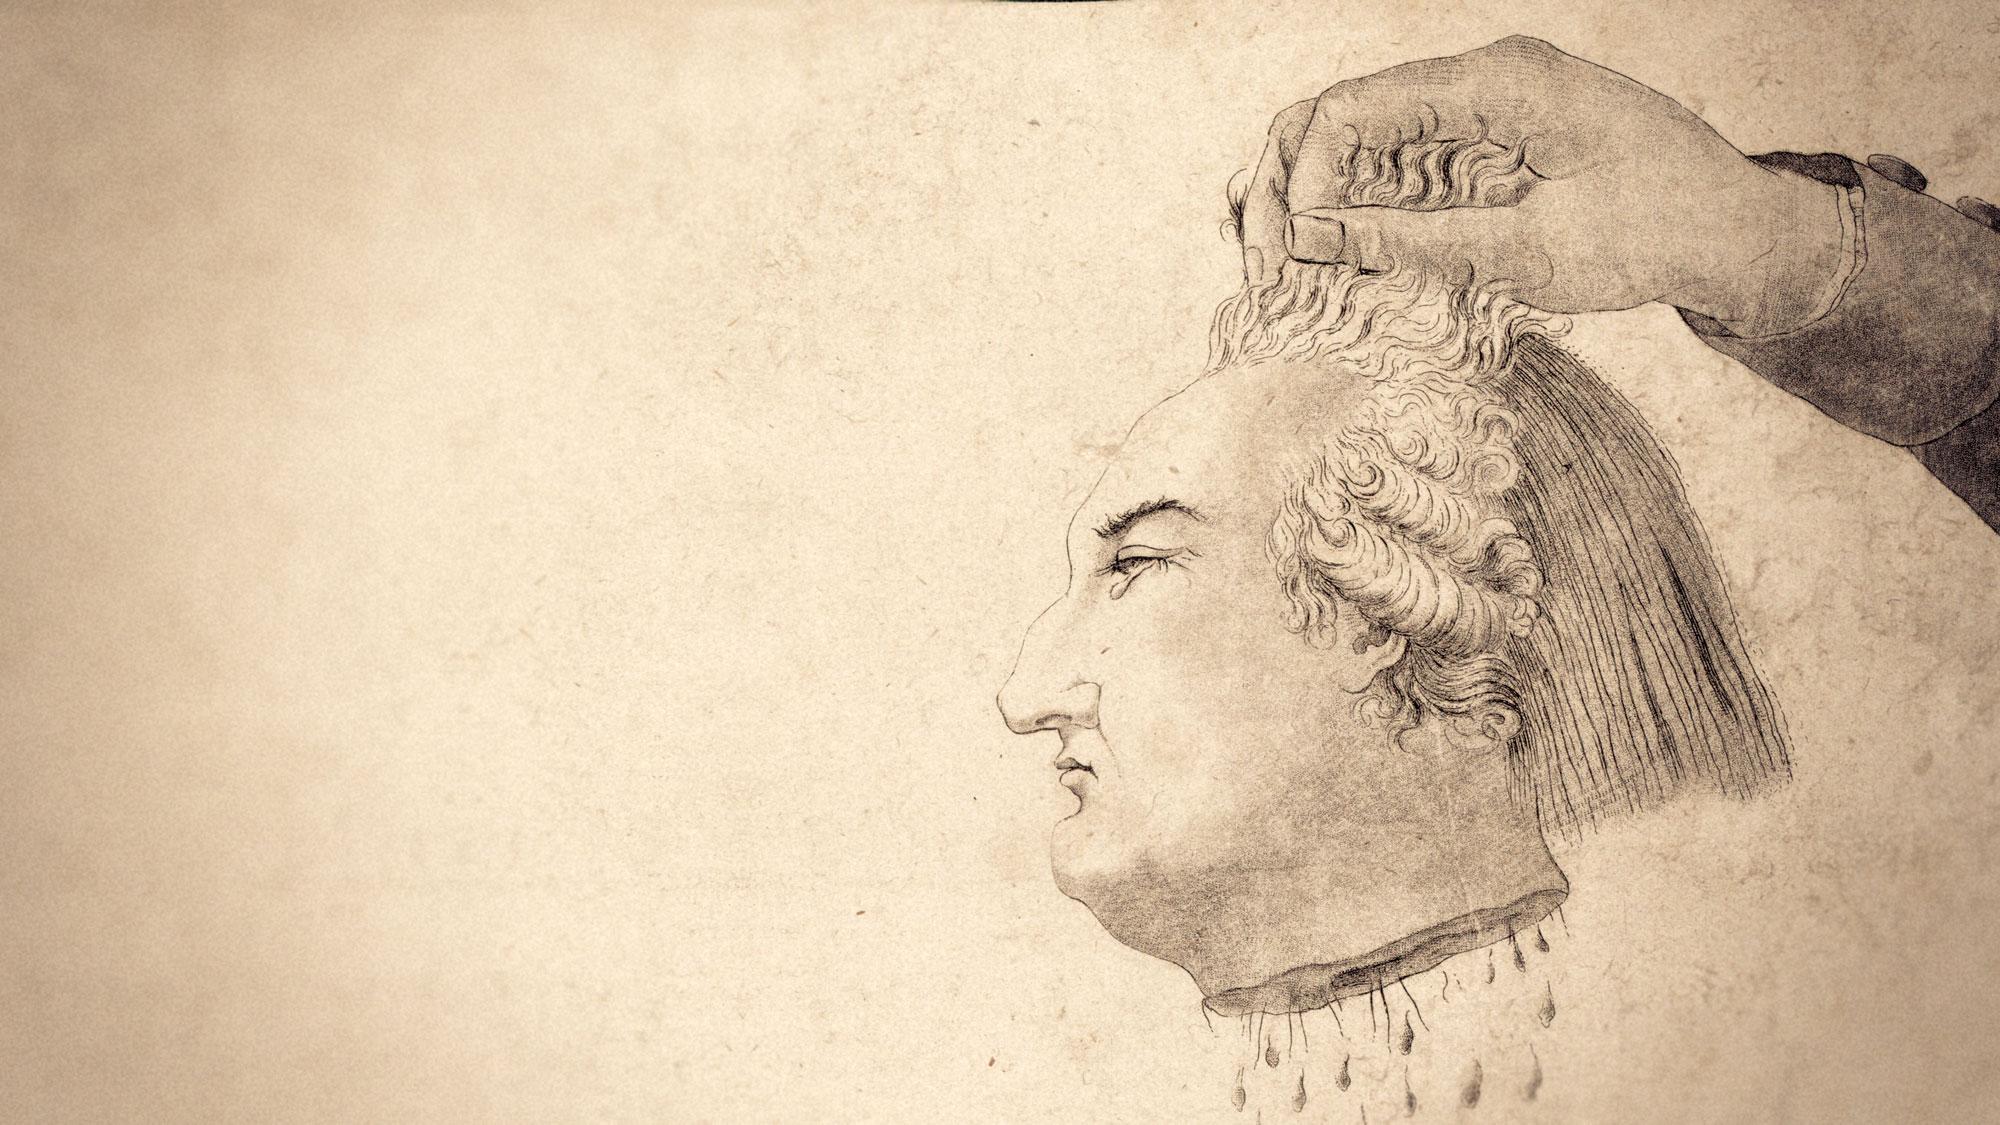 14,000 drawings of the French Revolution posted online / Boing Boing